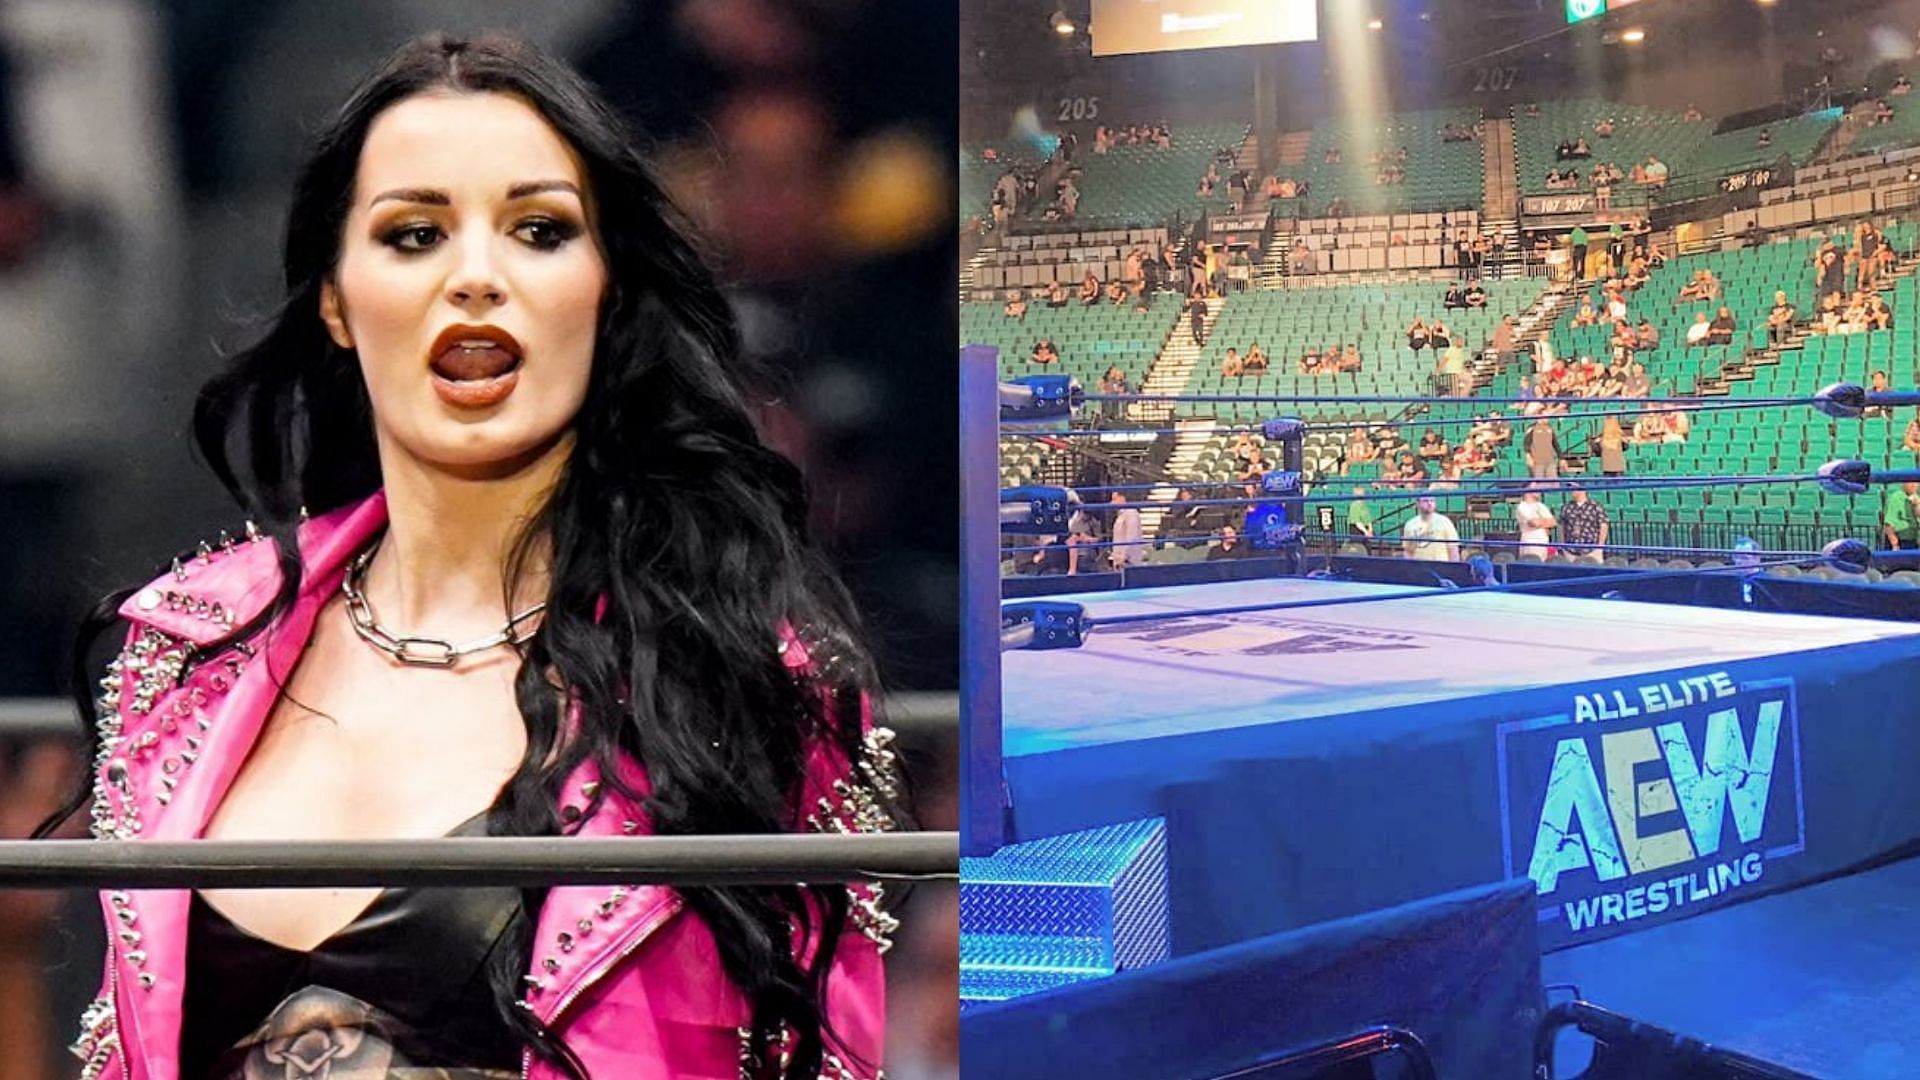 Saraya could be getting back in the ring